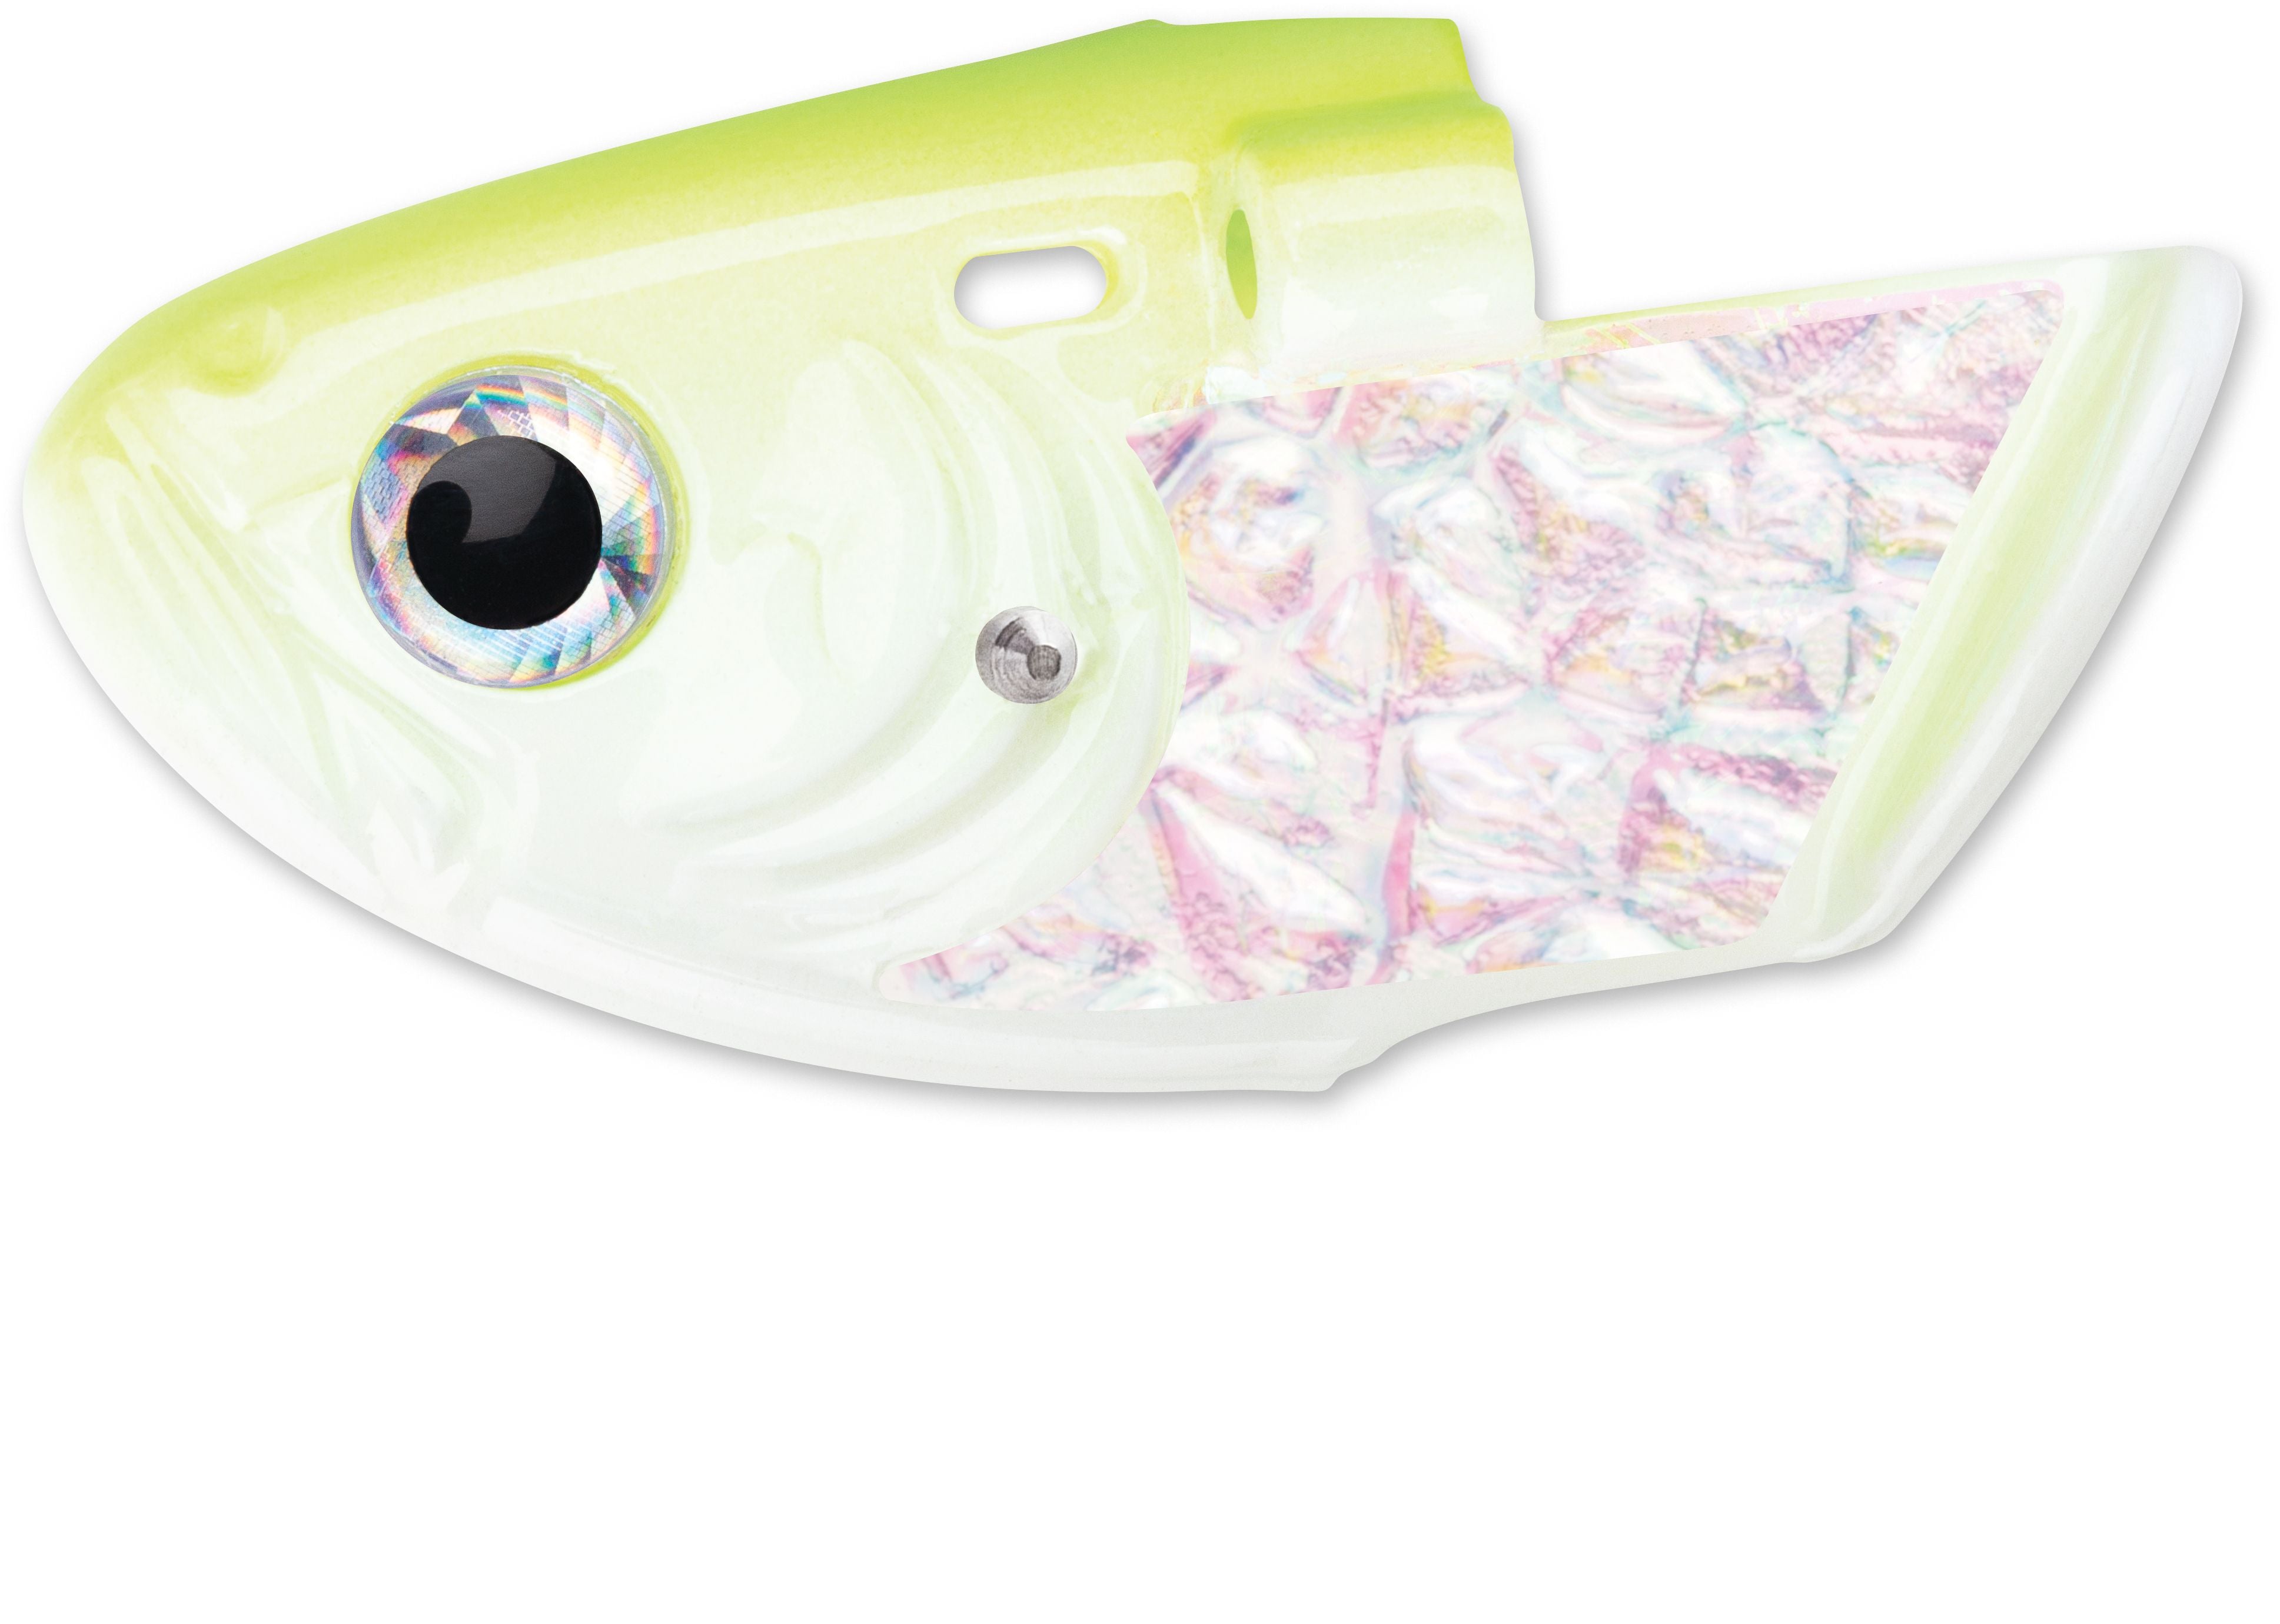 Luhr-Jensen Cut Bait Head with Rigging Chartreuse Glow